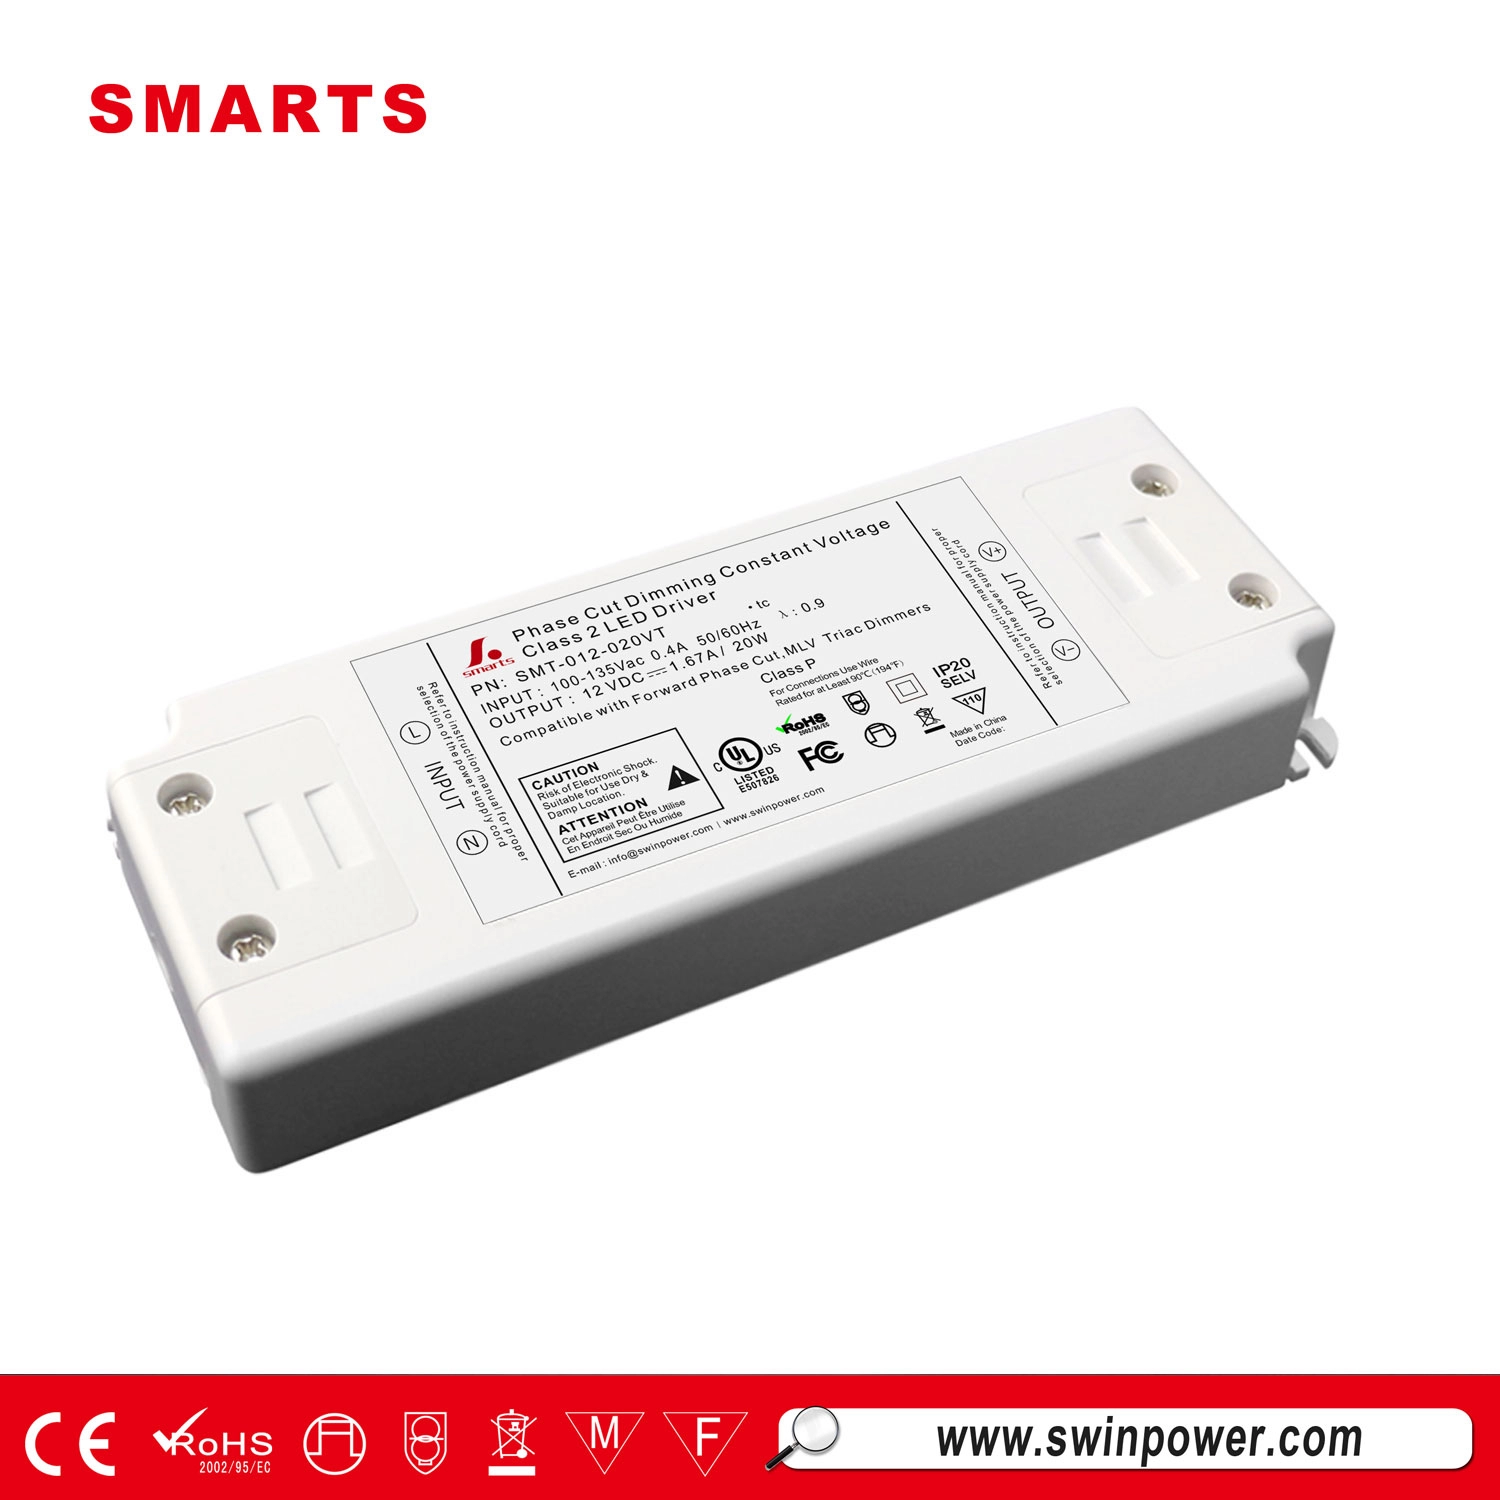 Class2 power supply 12v 20w triac dimmable led driver with UL CE ROHS FCC approval